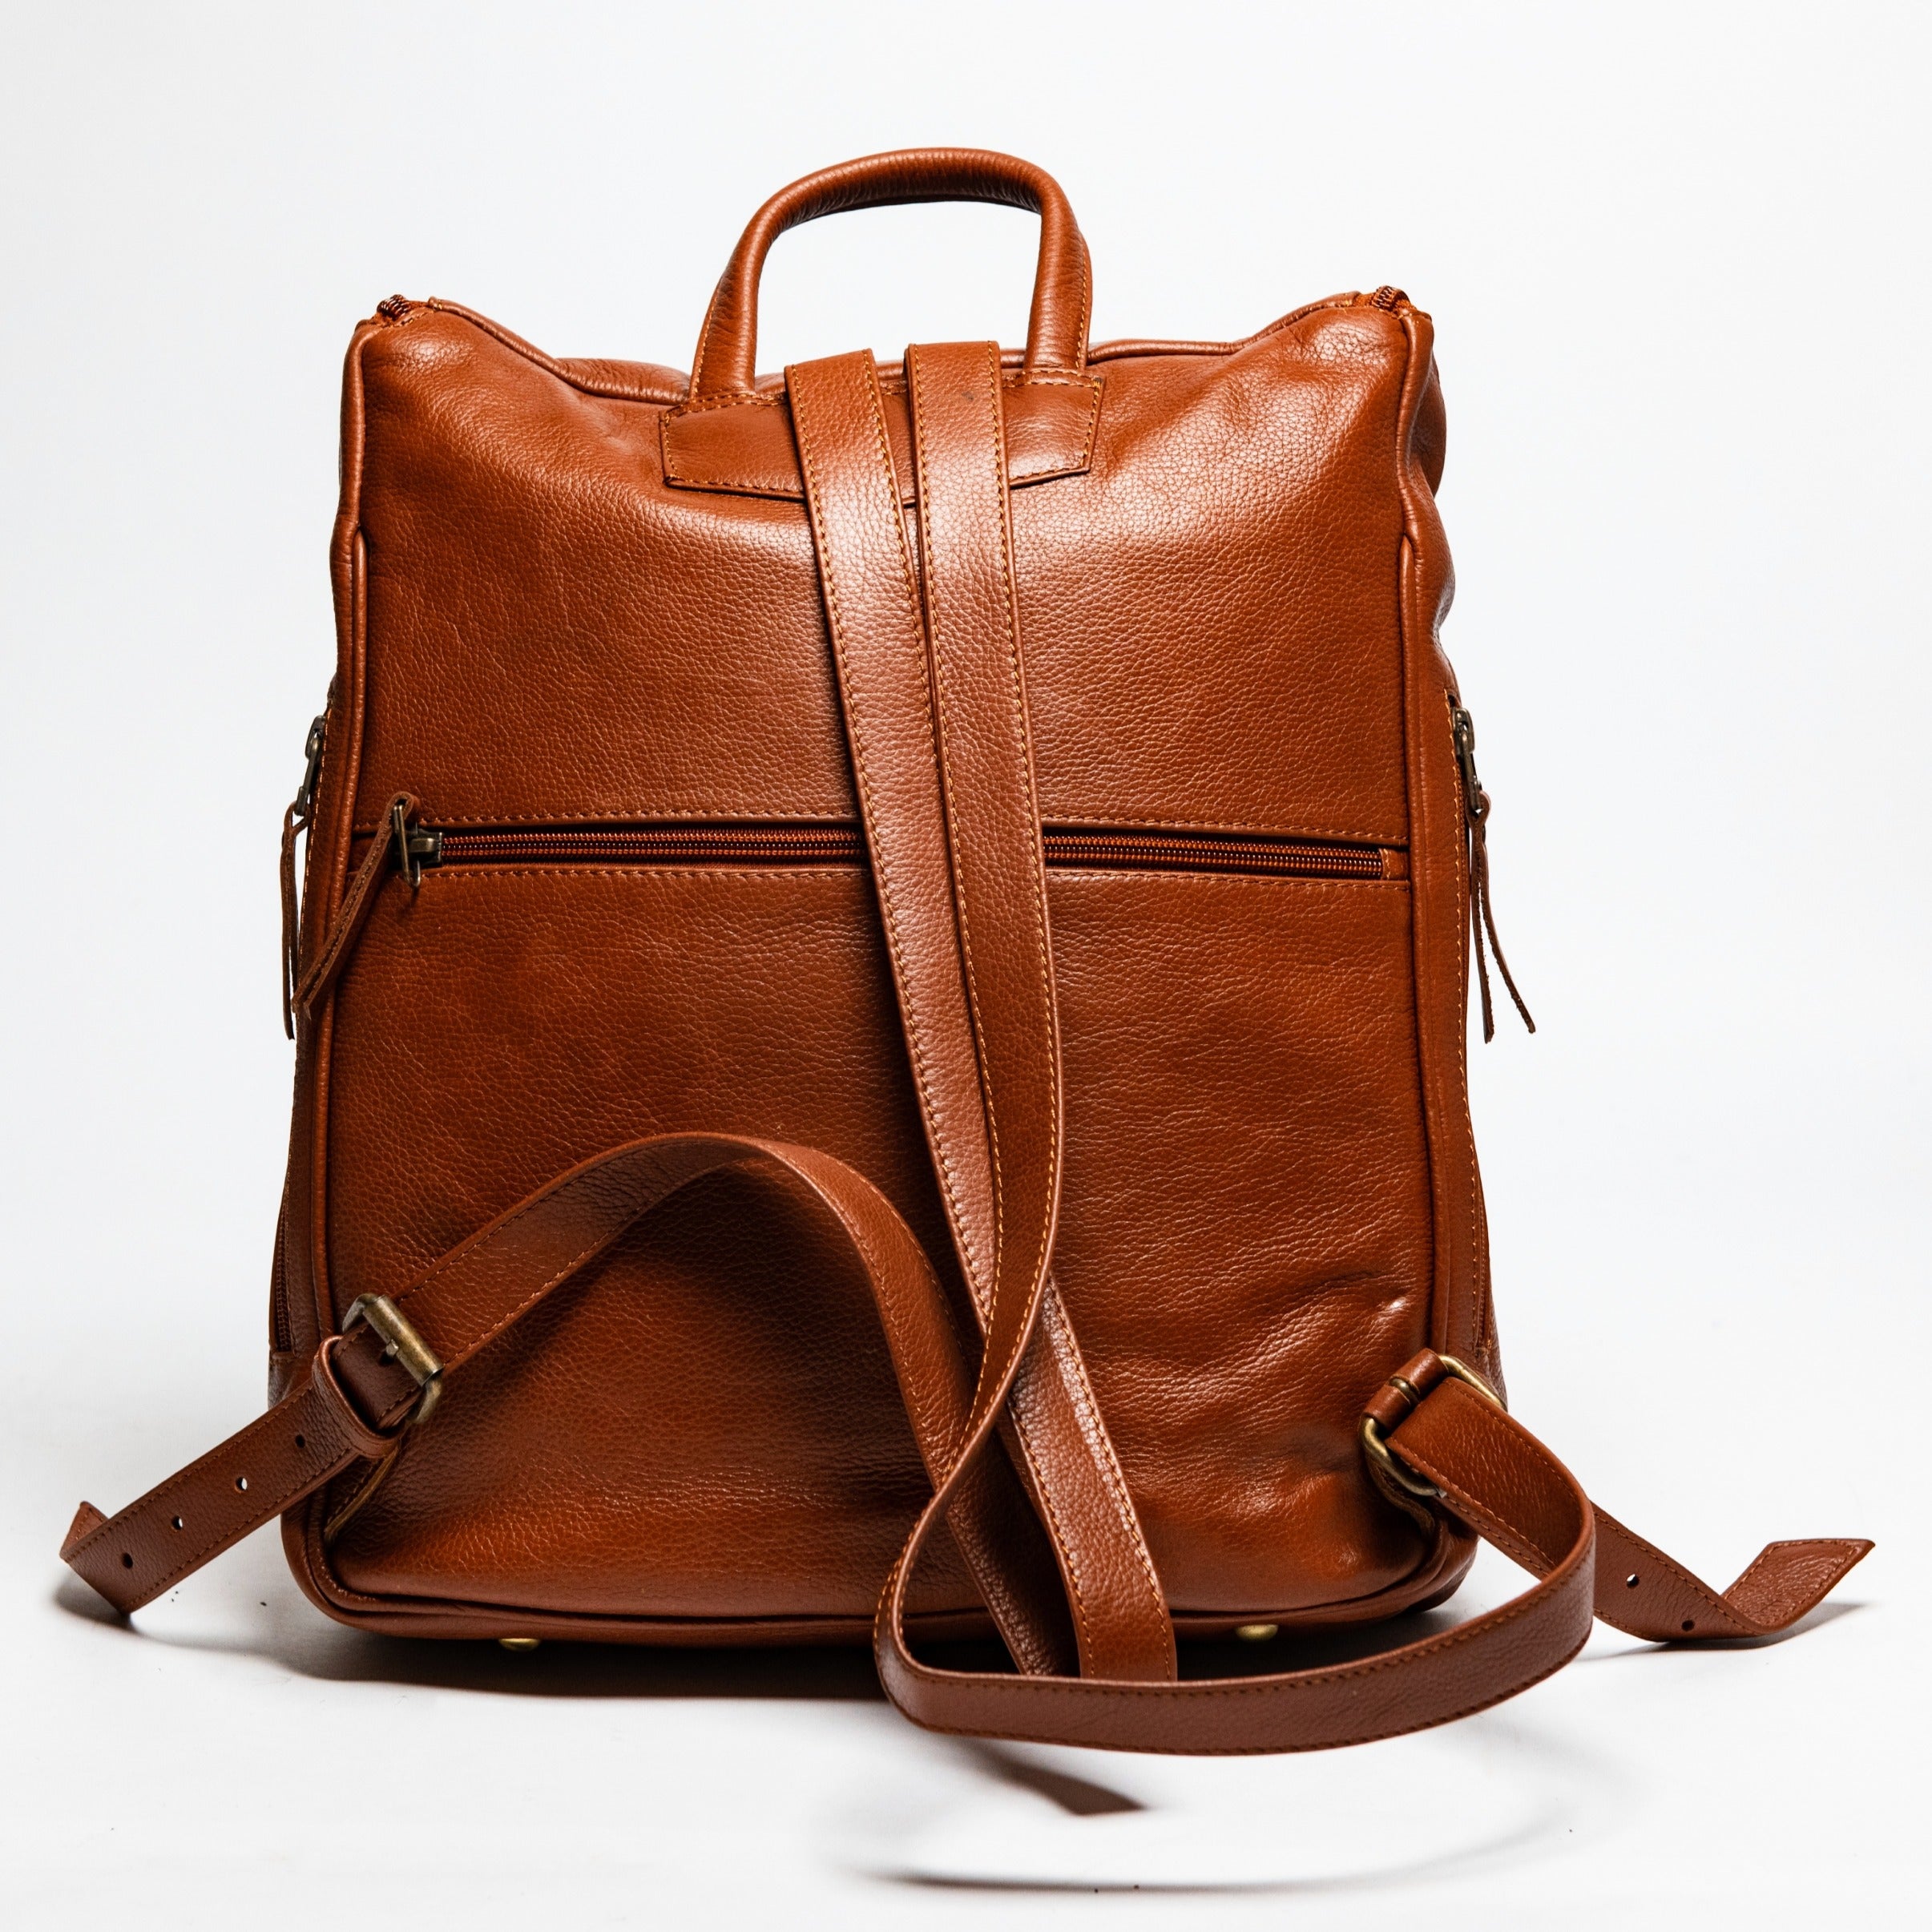 Student Leather Backpack - Tan